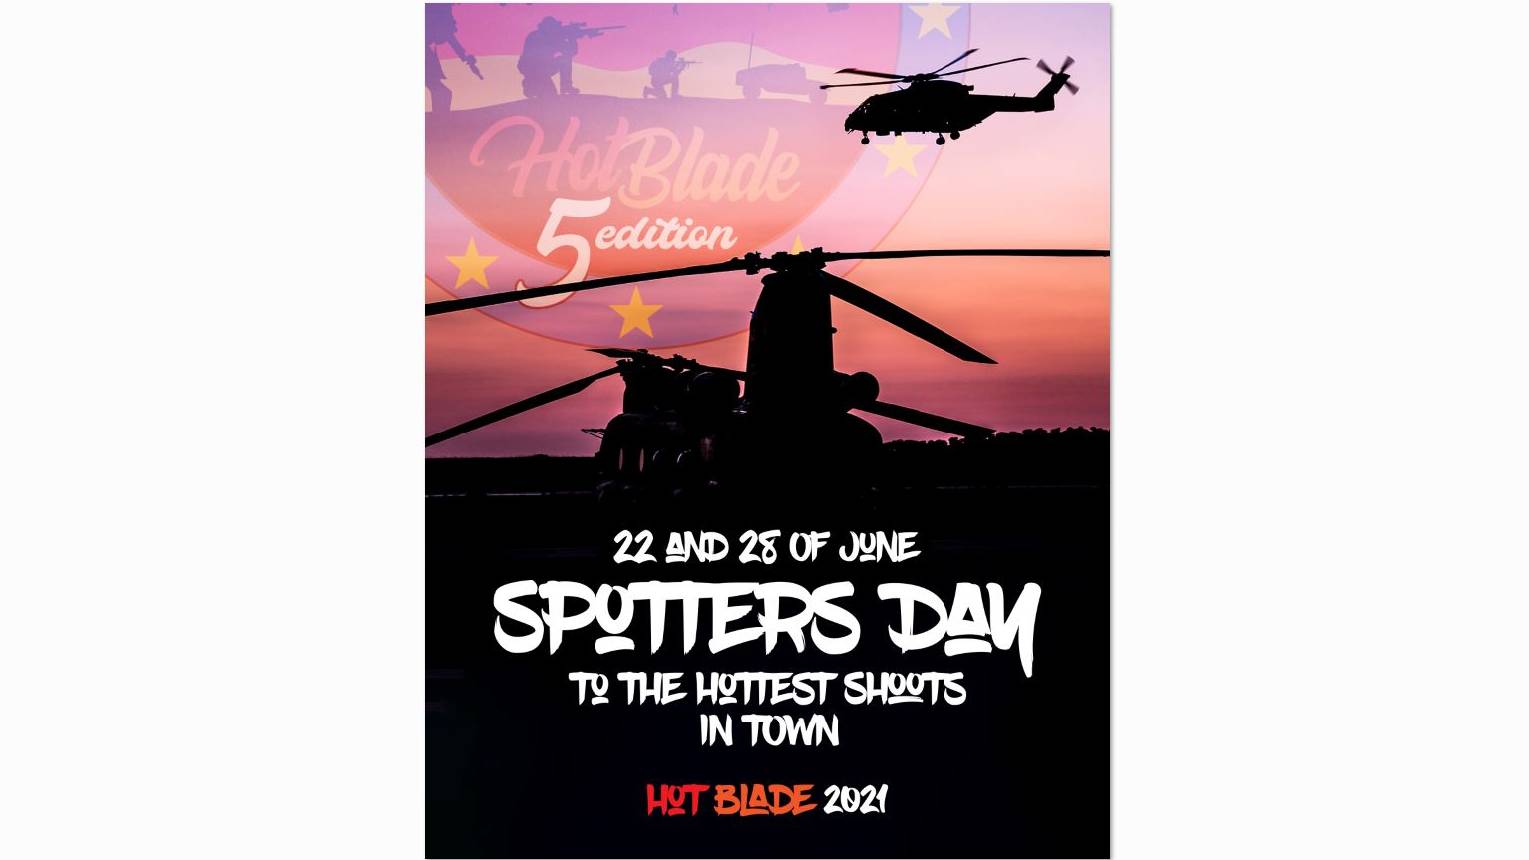 To the Hottest Spotters Day in town: Hot Blade 2021